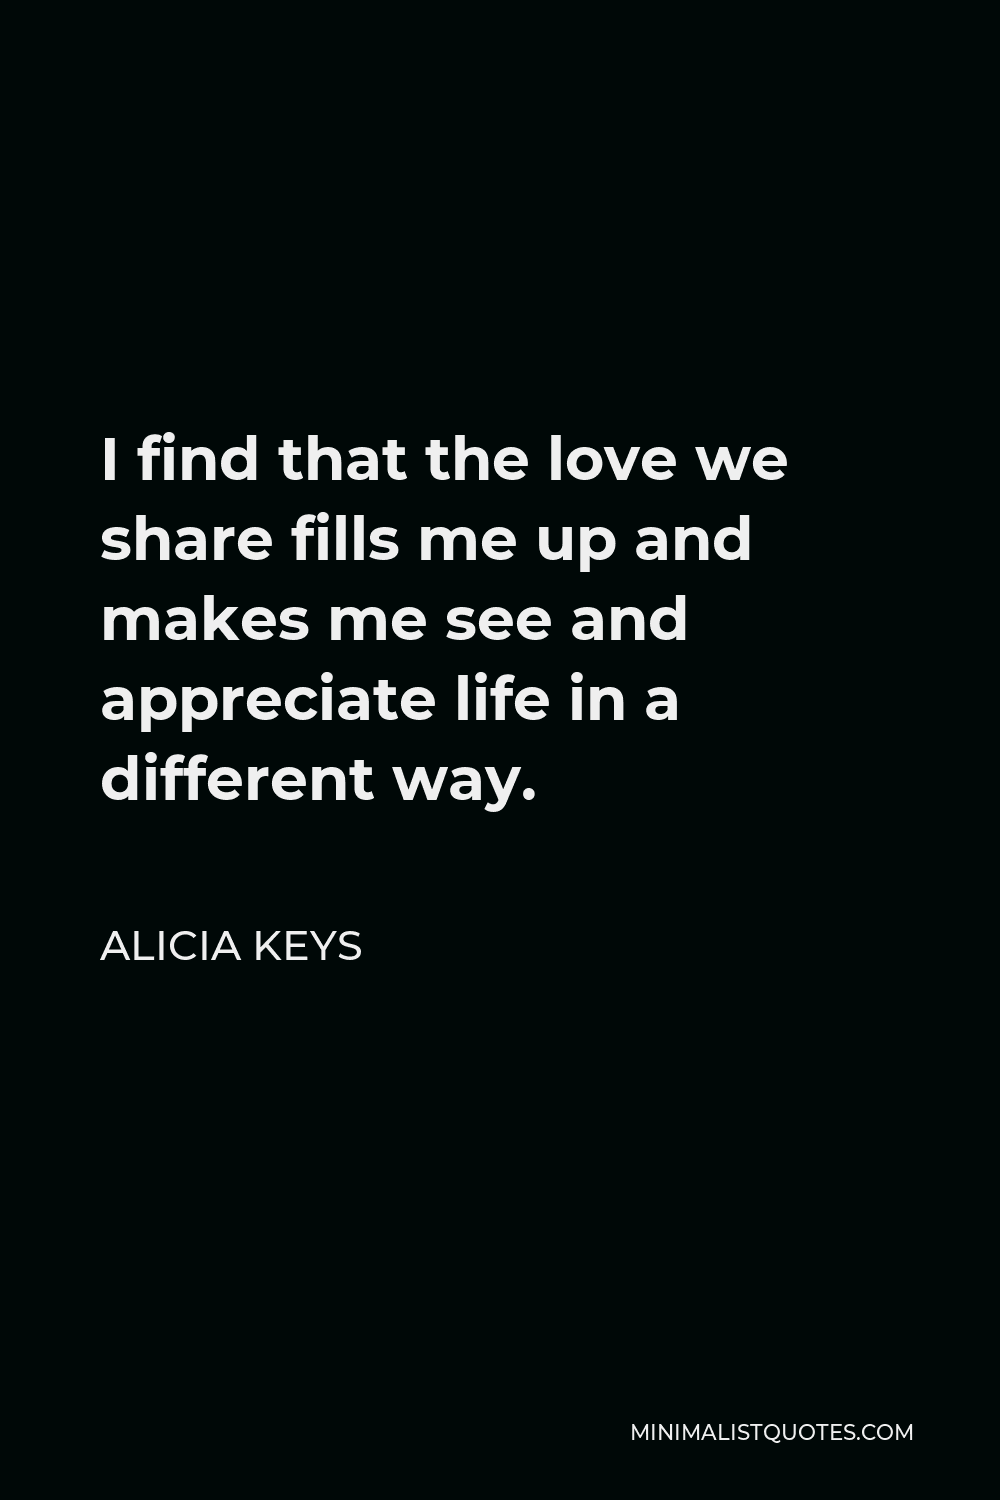 Alicia Keys Quote - I find that the love we share fills me up and makes me see and appreciate life in a different way.